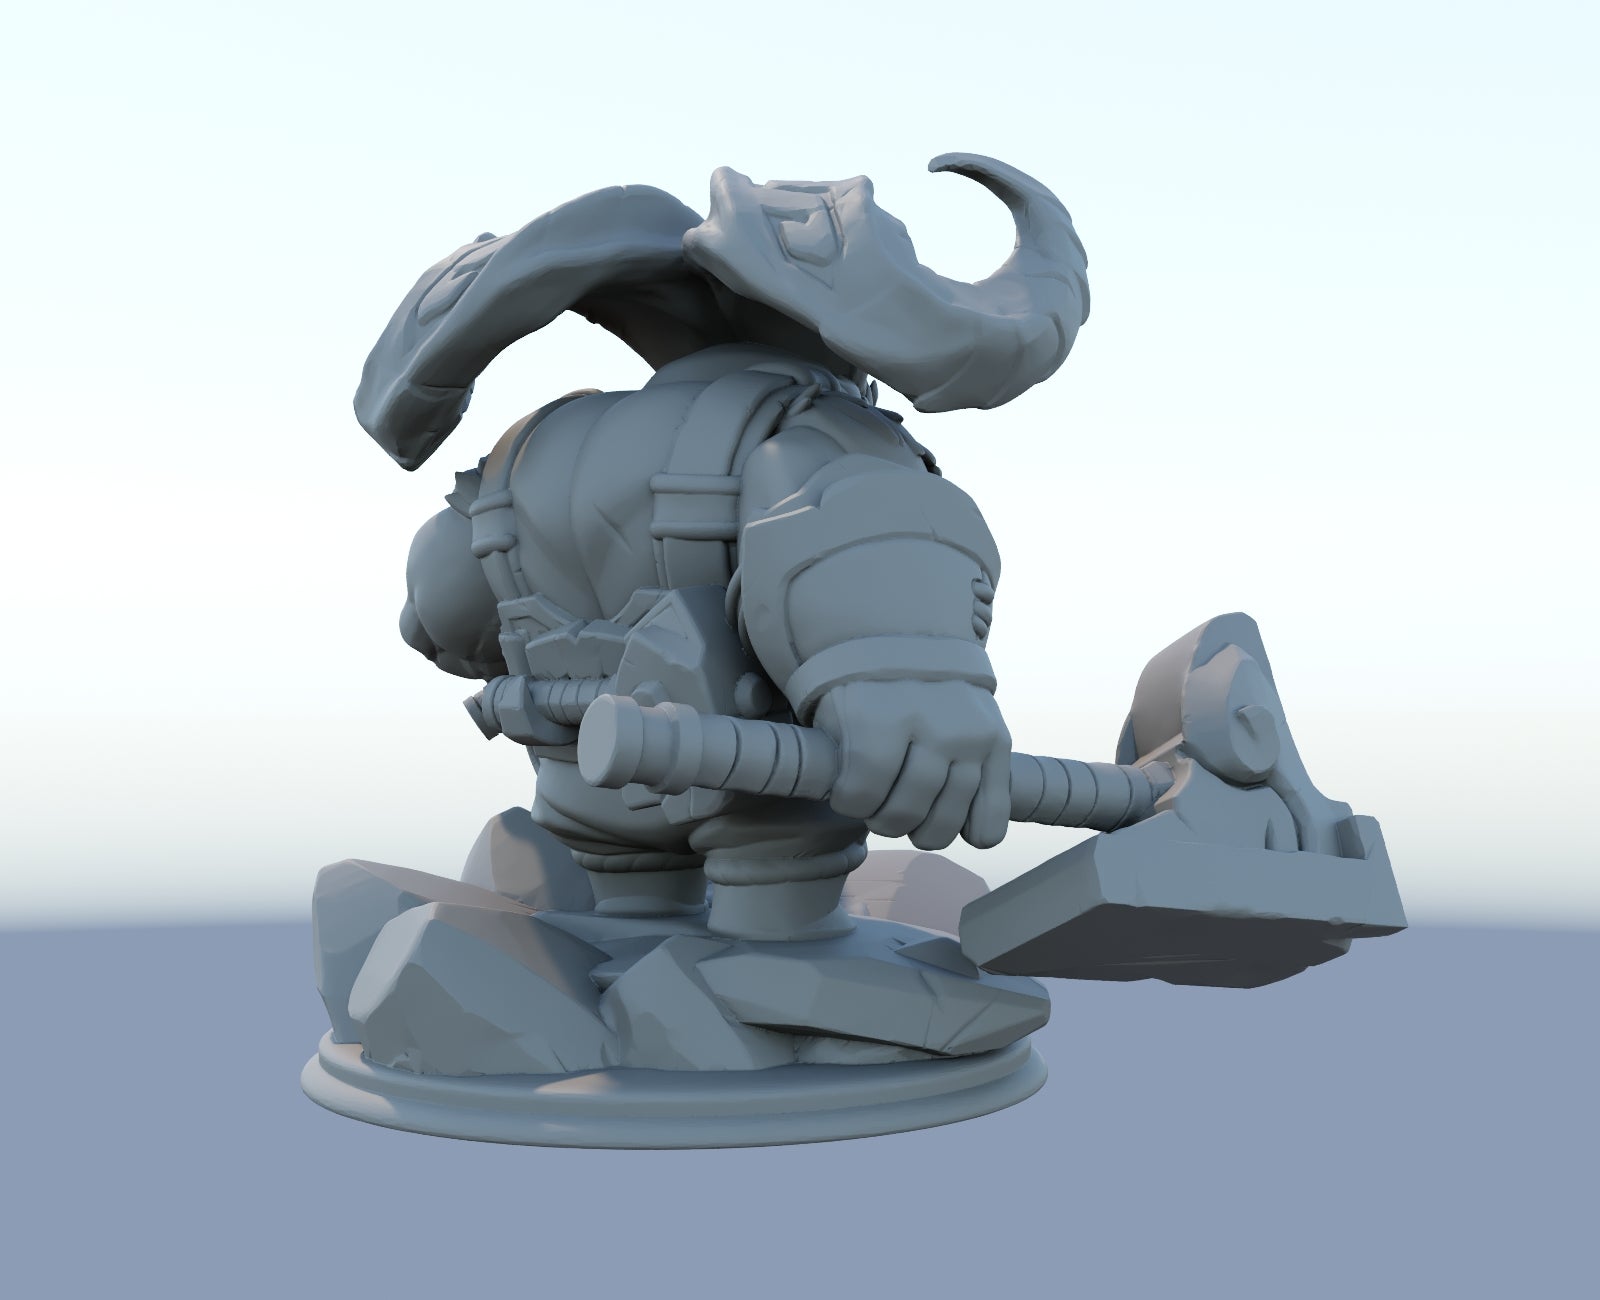 Ornn 3D-printed League of Legends champion figure. Decorate your gaming setup or home with your favorite League of Legends champion! Choose between the unpainted version, perfect for you to paint yourself, or the hand-painted version by a professional painter. Order your figure today!